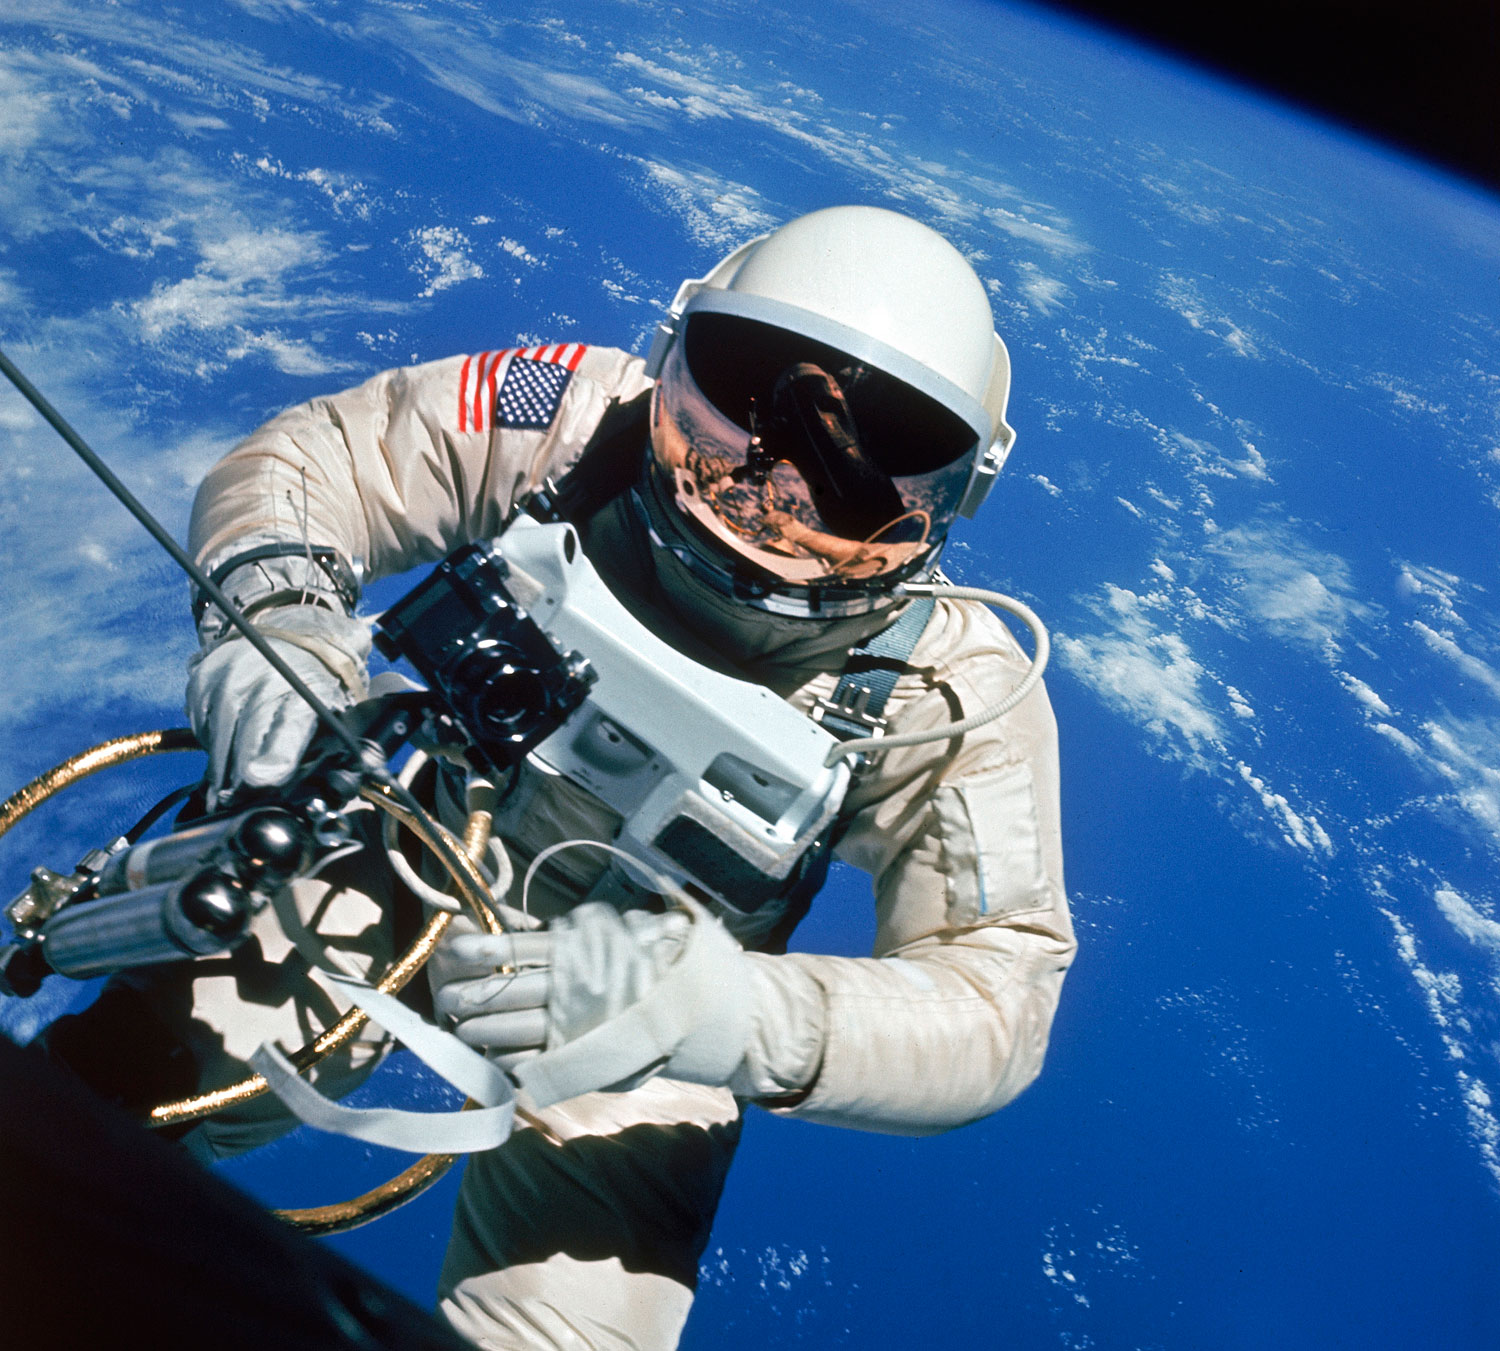 Edward White, the first American to walk in space, photographed by commander James McDivitt during NASA's Gemini 4 mission, June 1965.